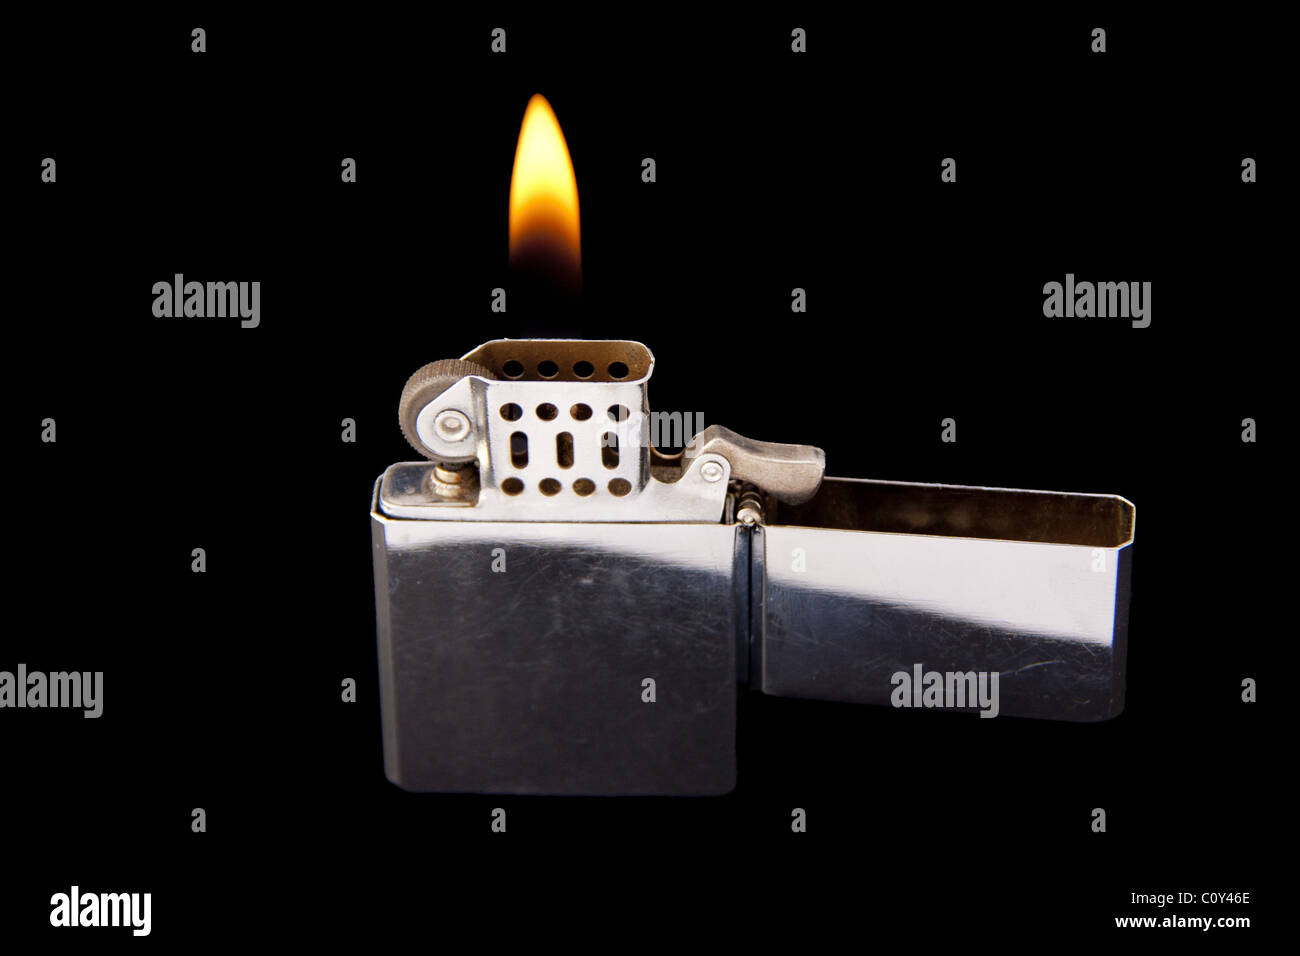 Lighter with flame Stock Photo